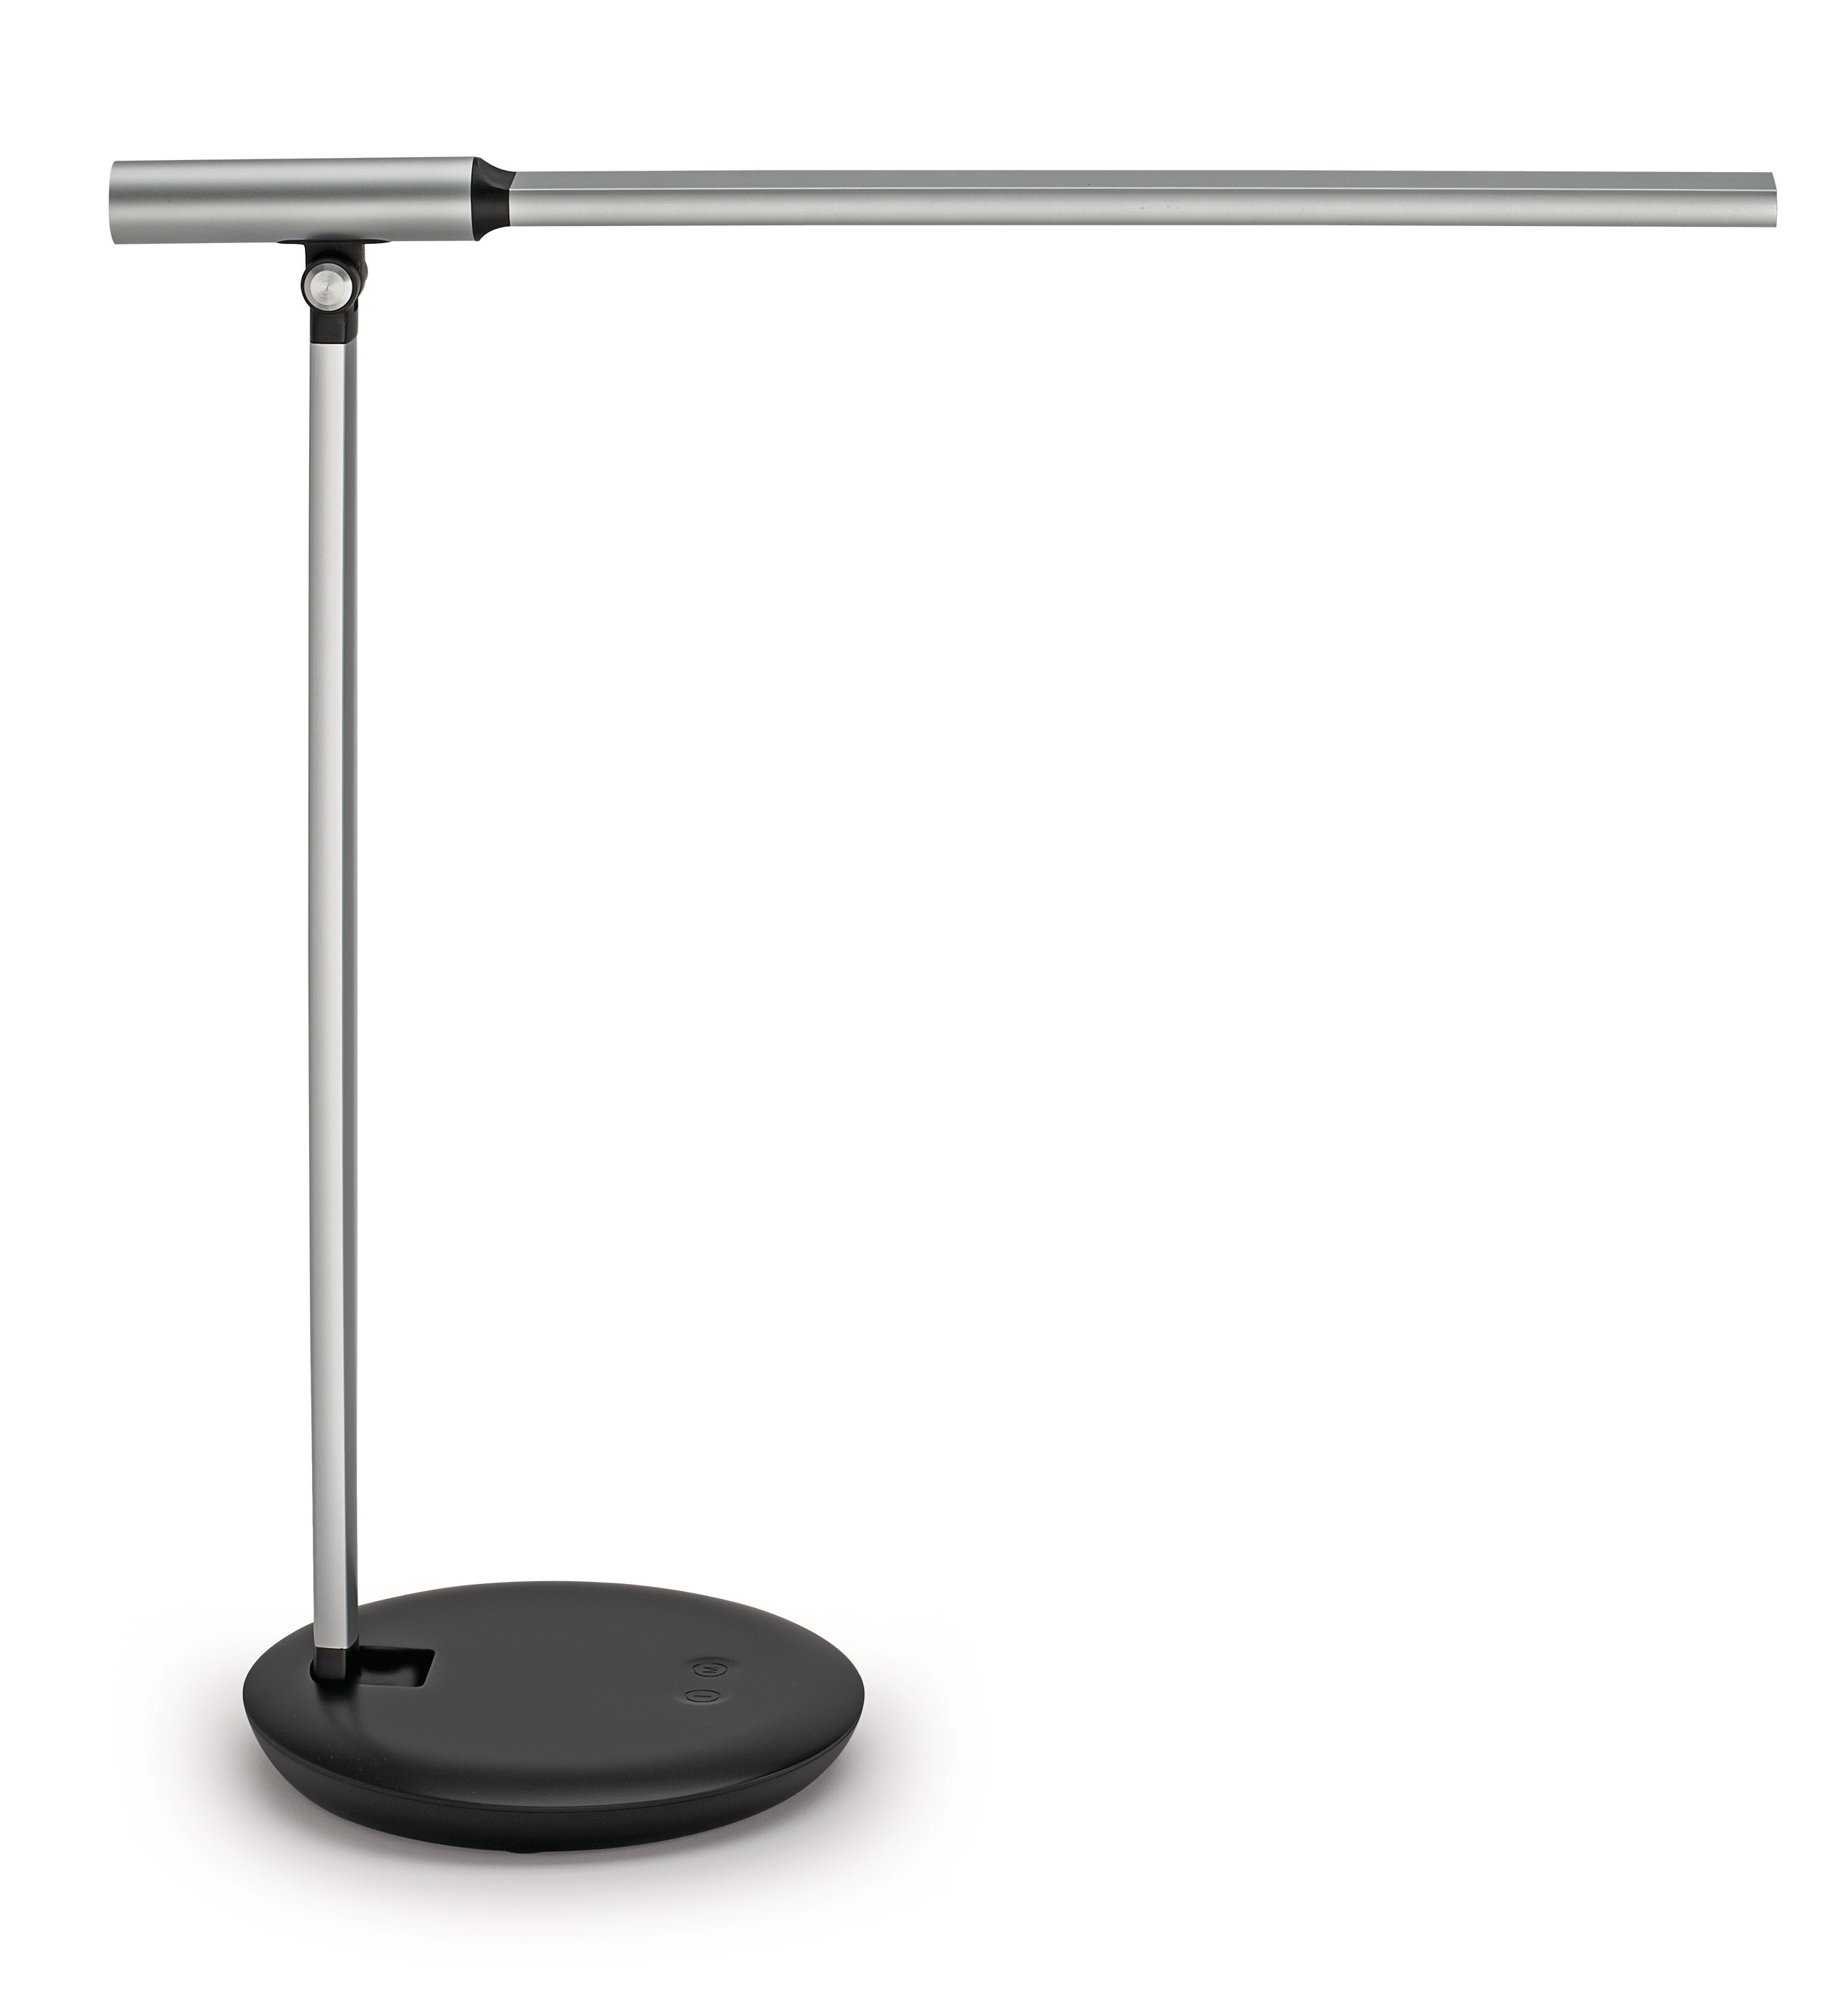 MAUL LED-Tischleuchte MAULrubia 8201595 silber, dimmbar, USB